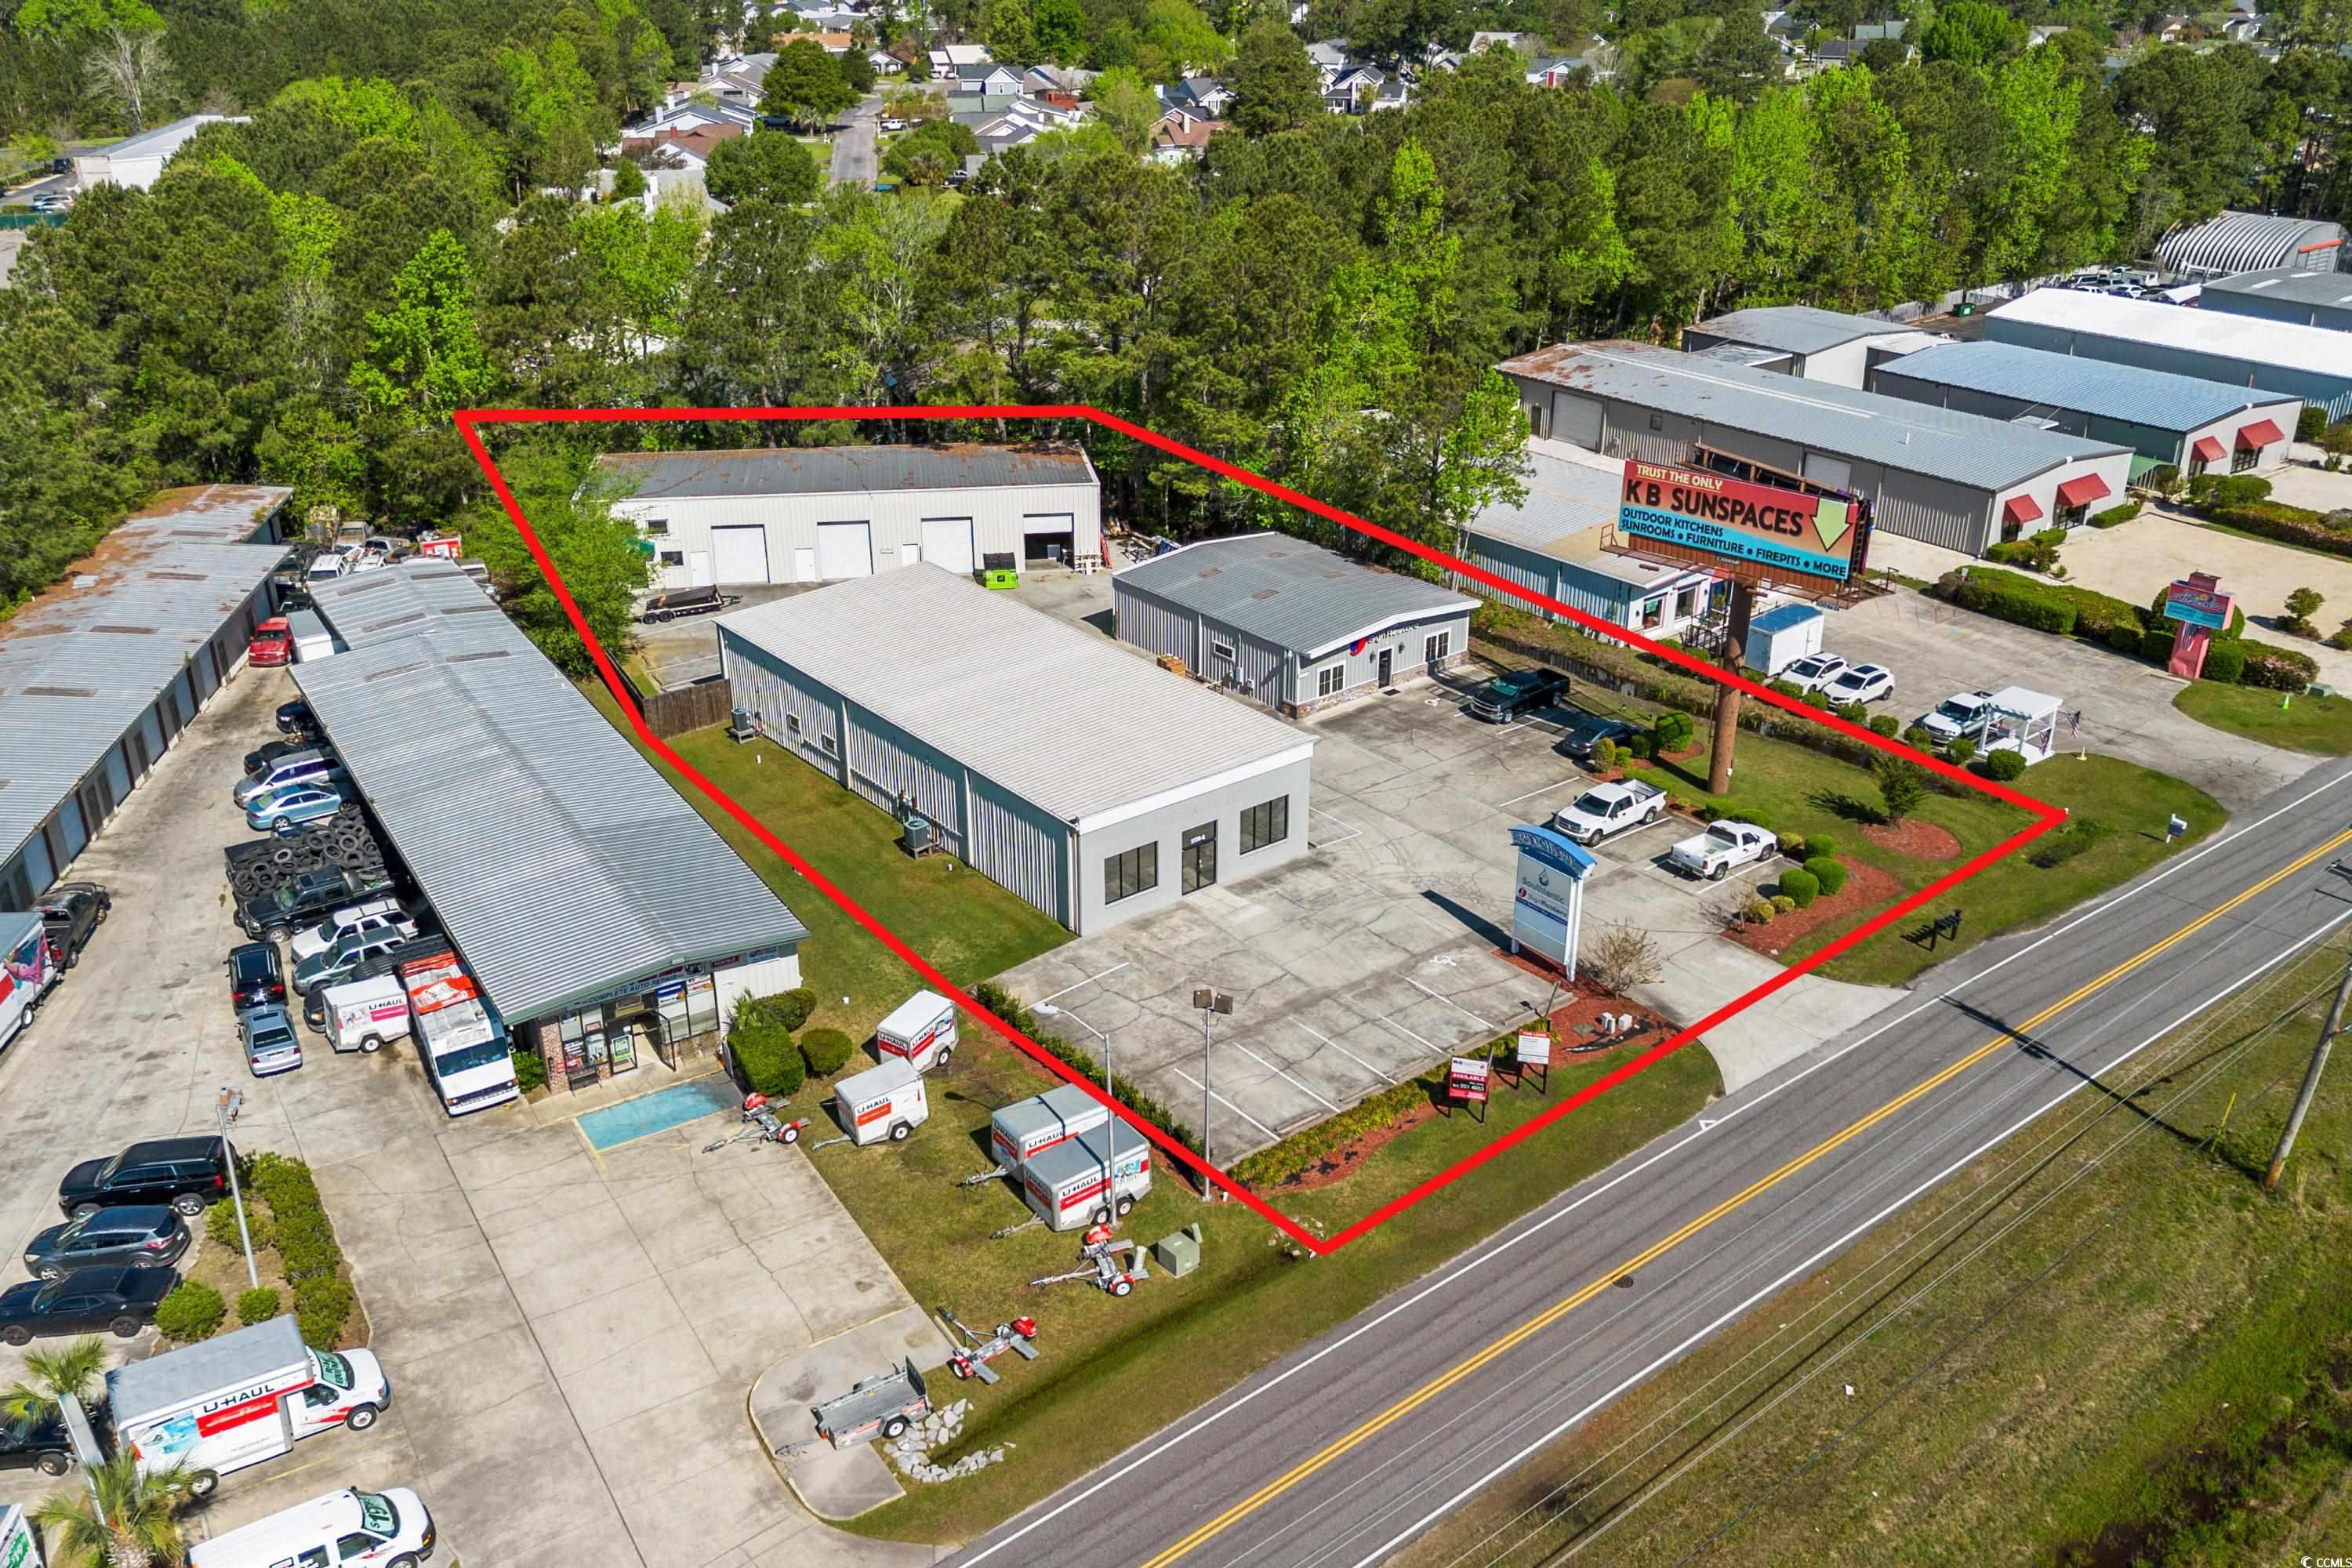 looking for a great building to lease with high traffic visibility for retail or display area for your business. the space has 12' ft ceilings, two bathrooms, inside storage area with a roll up door, large open area for display and small utility area. available for lease also. the back section has 1500 sq. ft with office space (1174b) and is available.